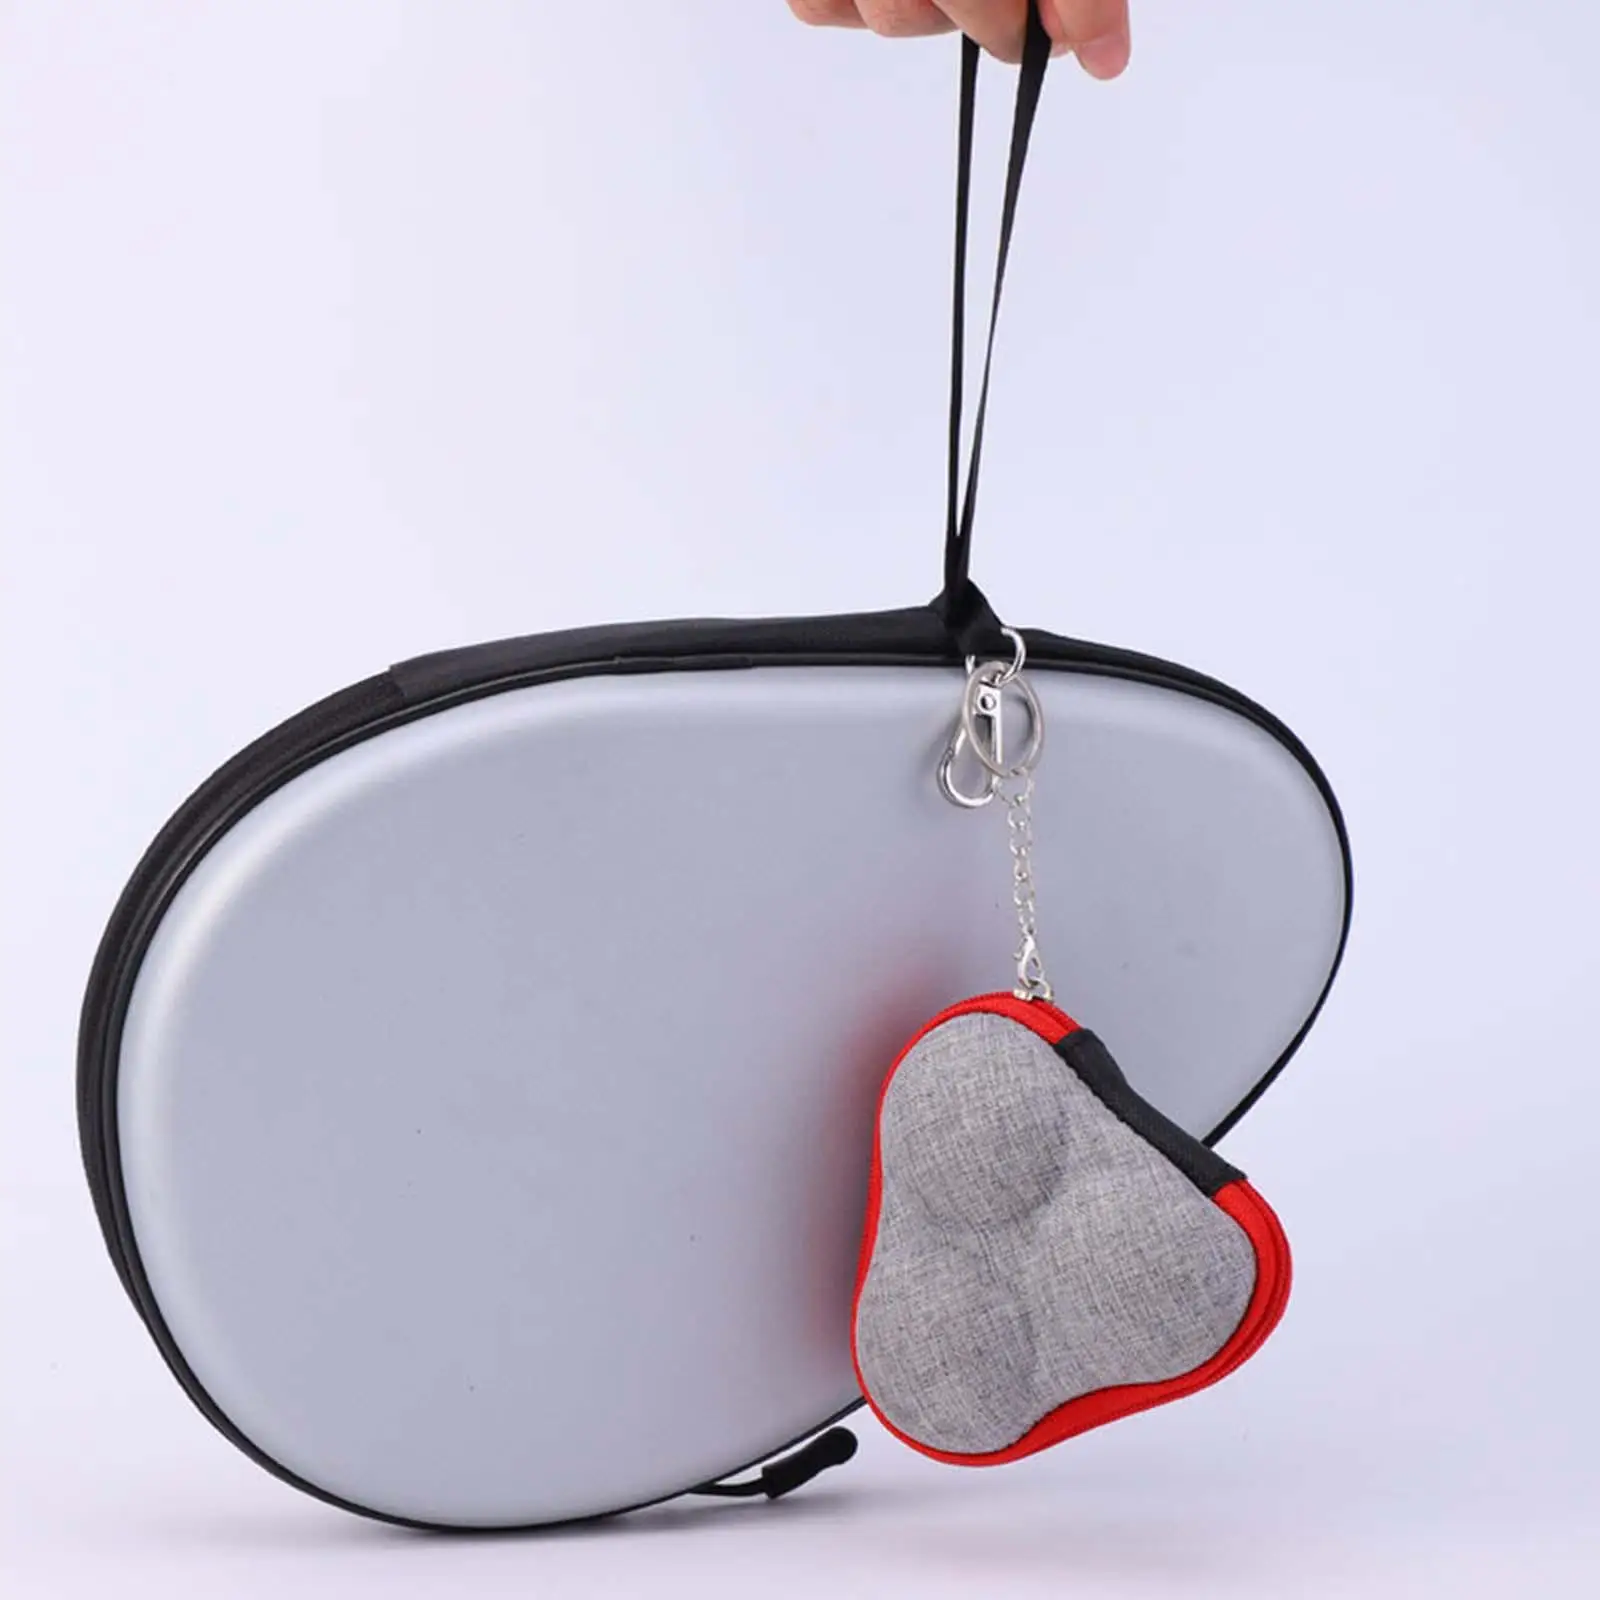 Pingpong Bag Portable with Ball Case Protector for Unisex Adult Competition